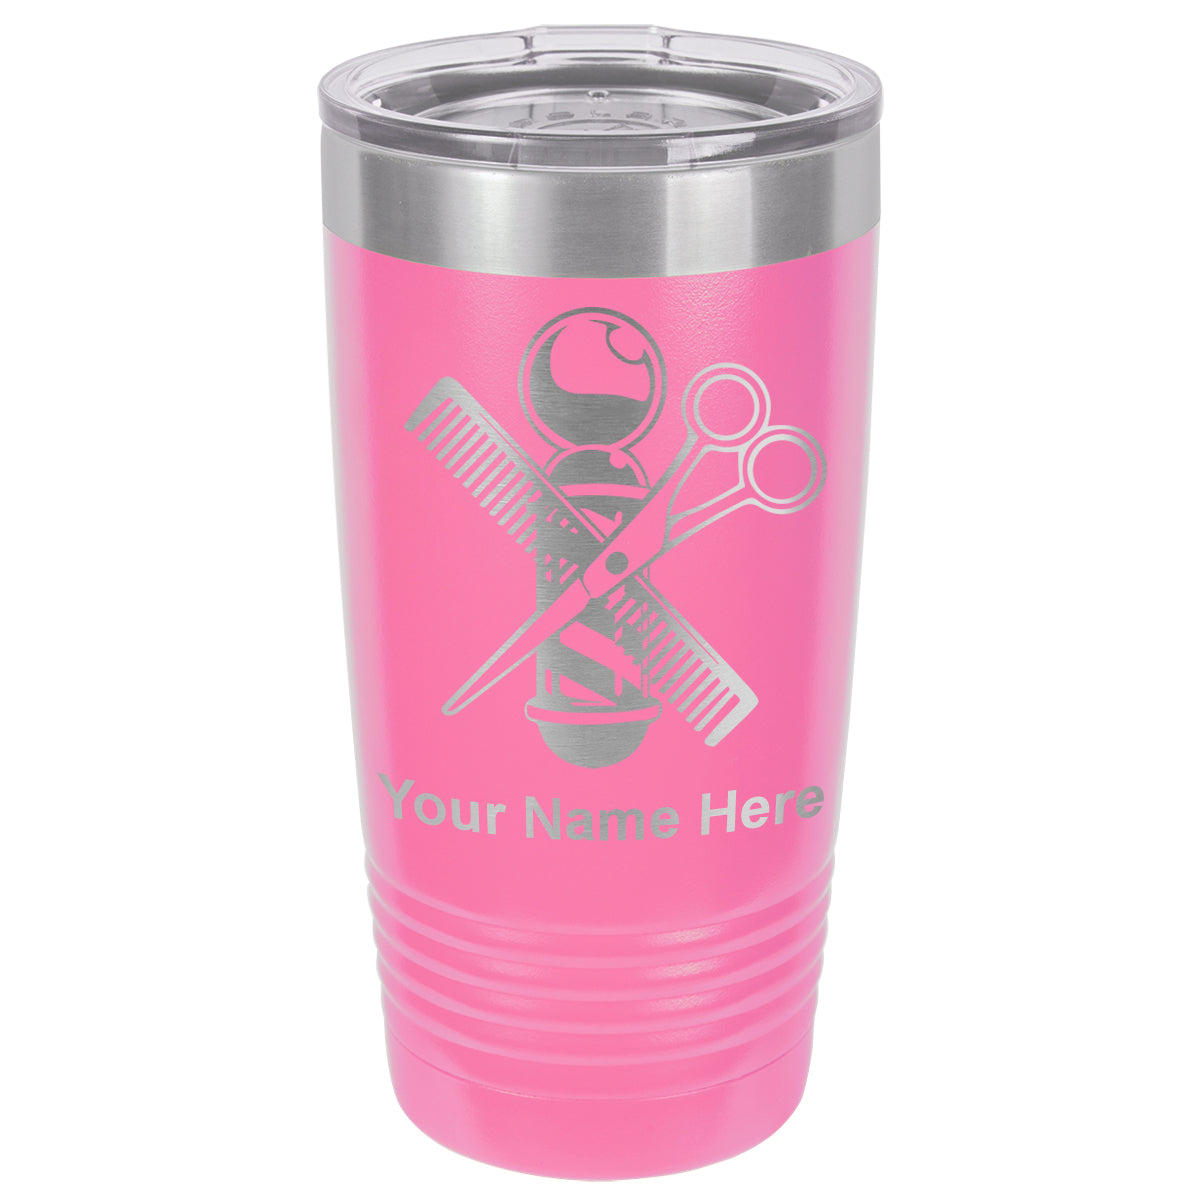 20oz Vacuum Insulated Tumbler Mug, Barber Shop Pole, Personalized Engraving Included